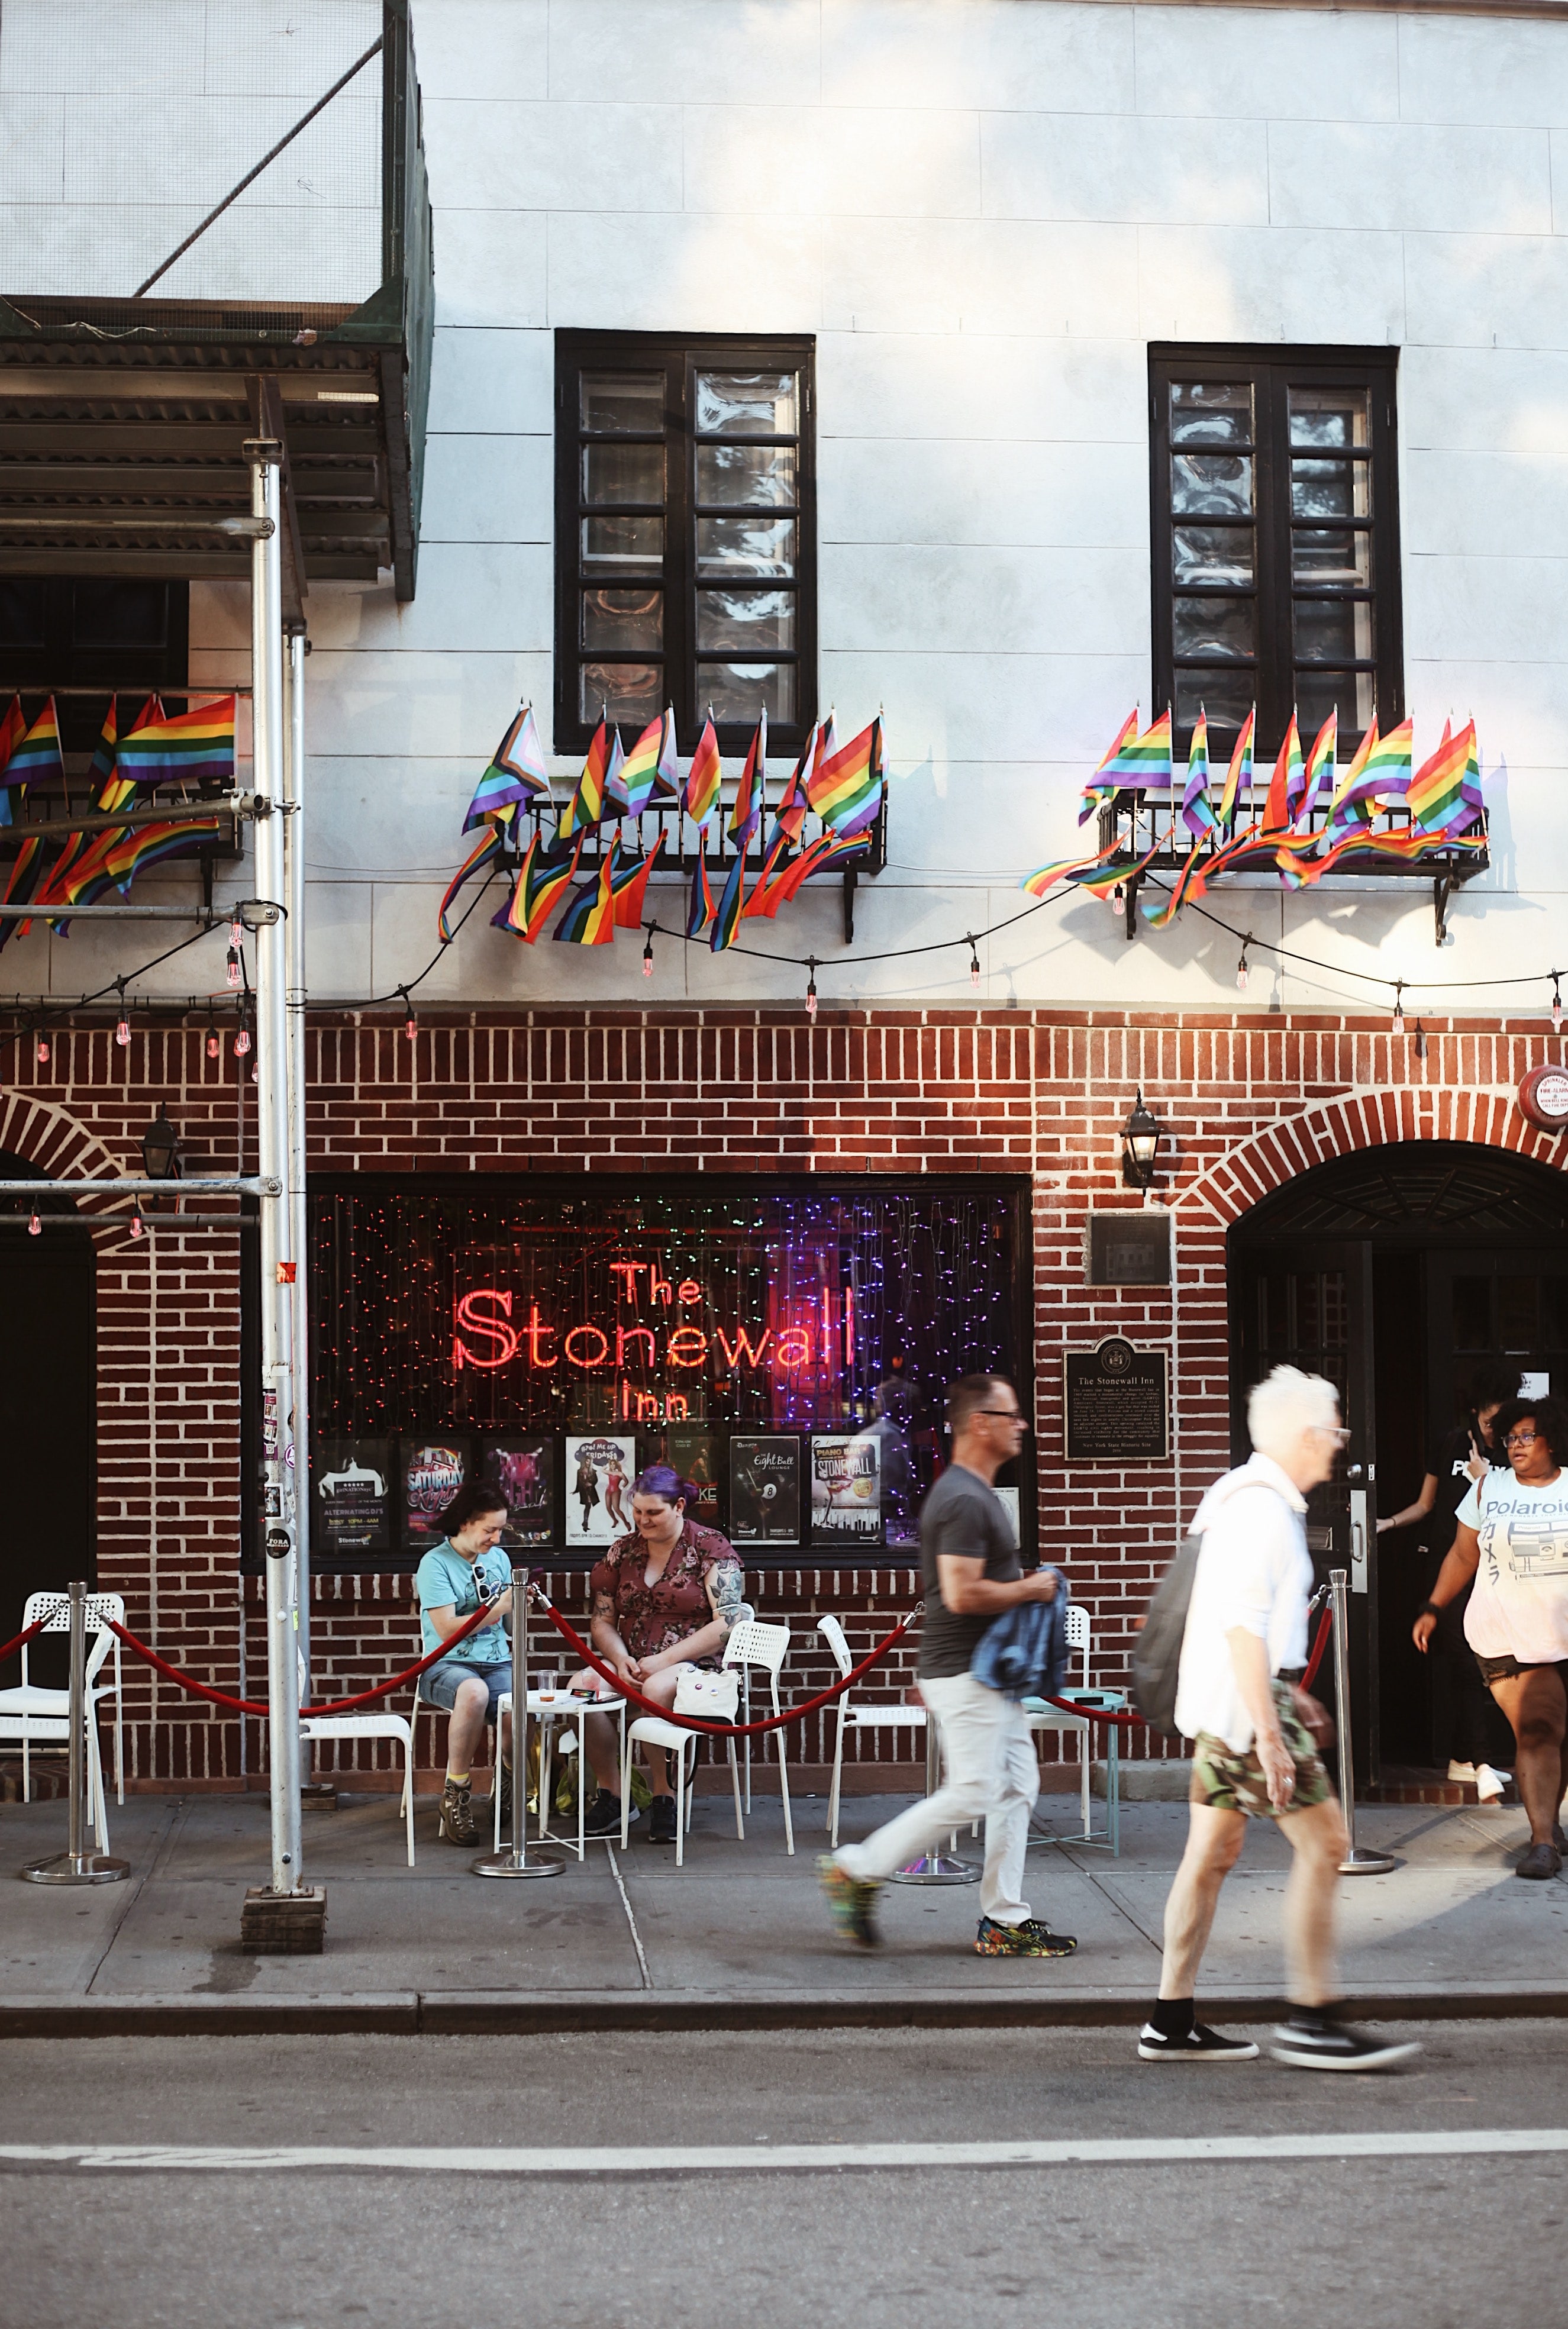 The landmarked Stonewall Inn will be a hub of activity on the day of the Pride March—in these parts, expect to see more rainbows than ever before.